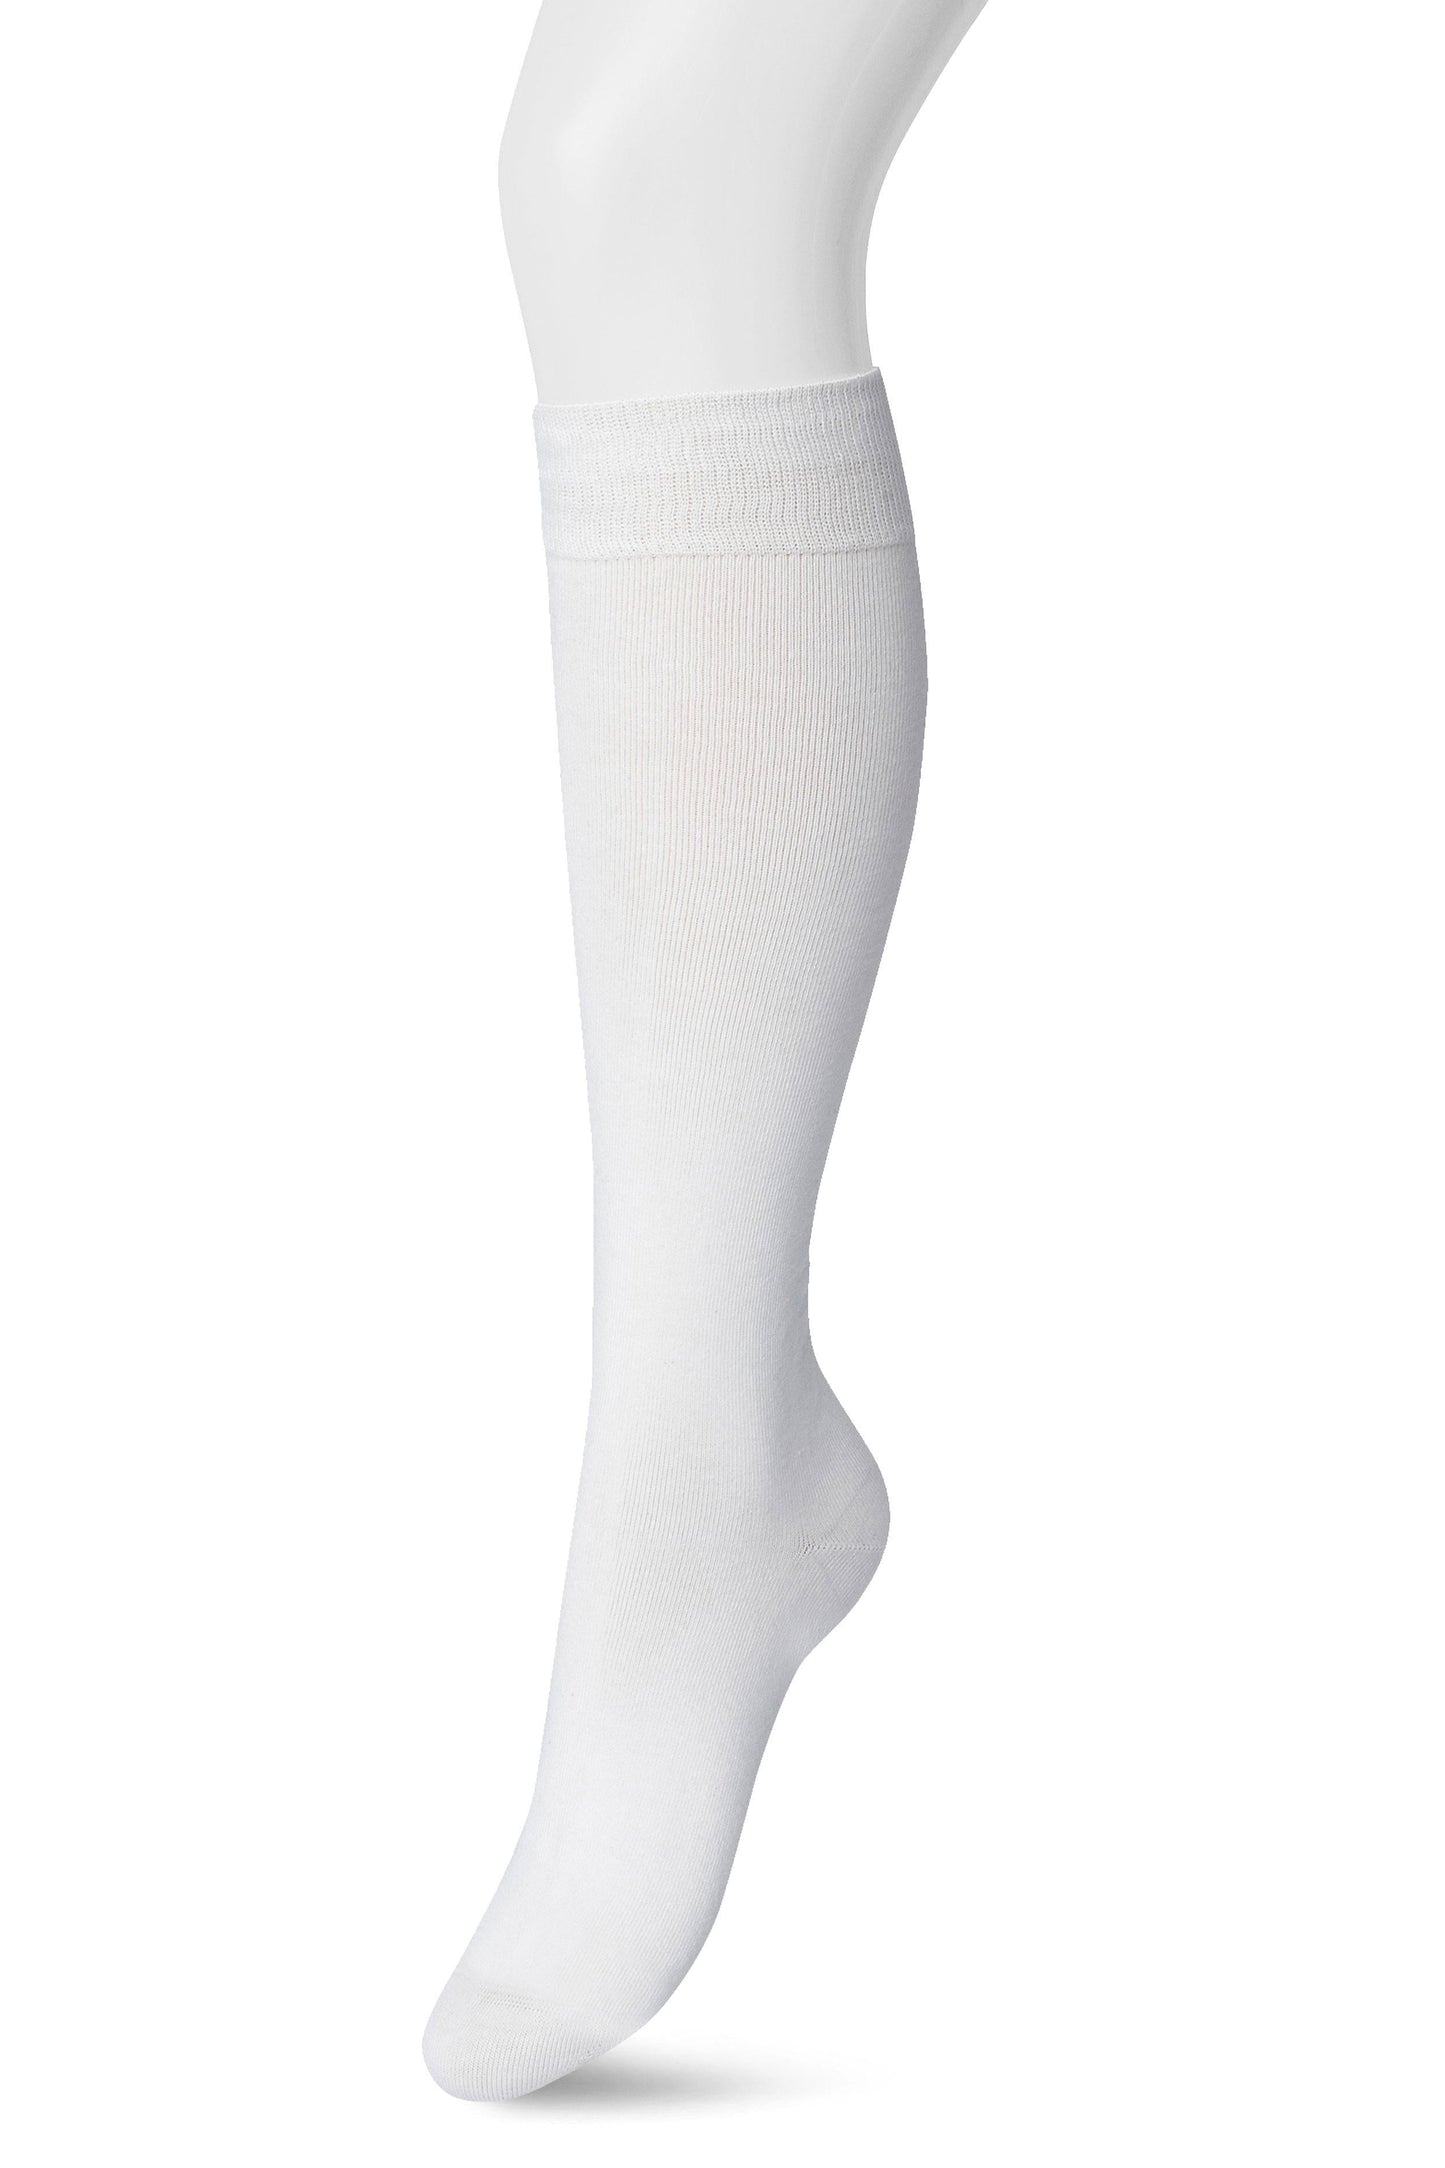 Bonnie Doon 83430 Cotton Knee-Highs - White soft and plain cotton knee length socks with a shaped heel, flat toe seam and deep elasticated comfort cuff.